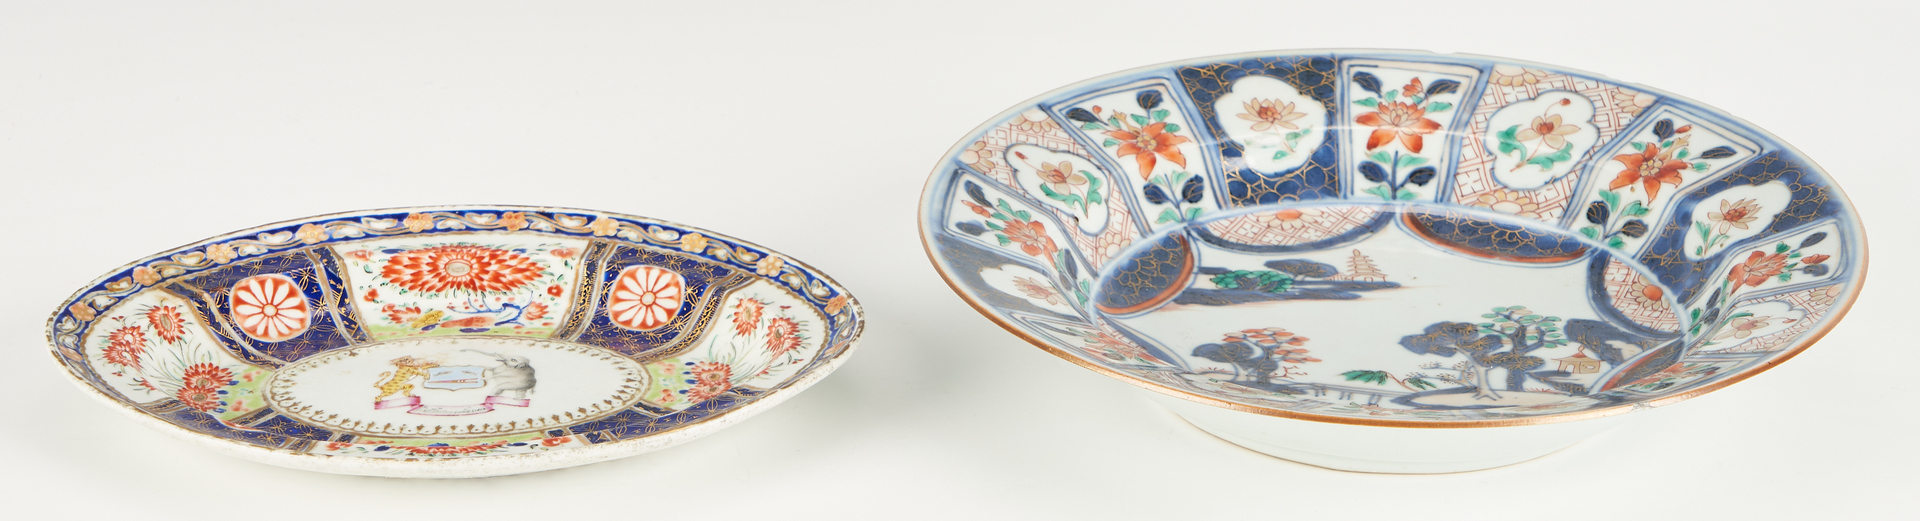 Lot 1068: 7 Chinese Export & English Porcelain Items, incl. Famille Rose